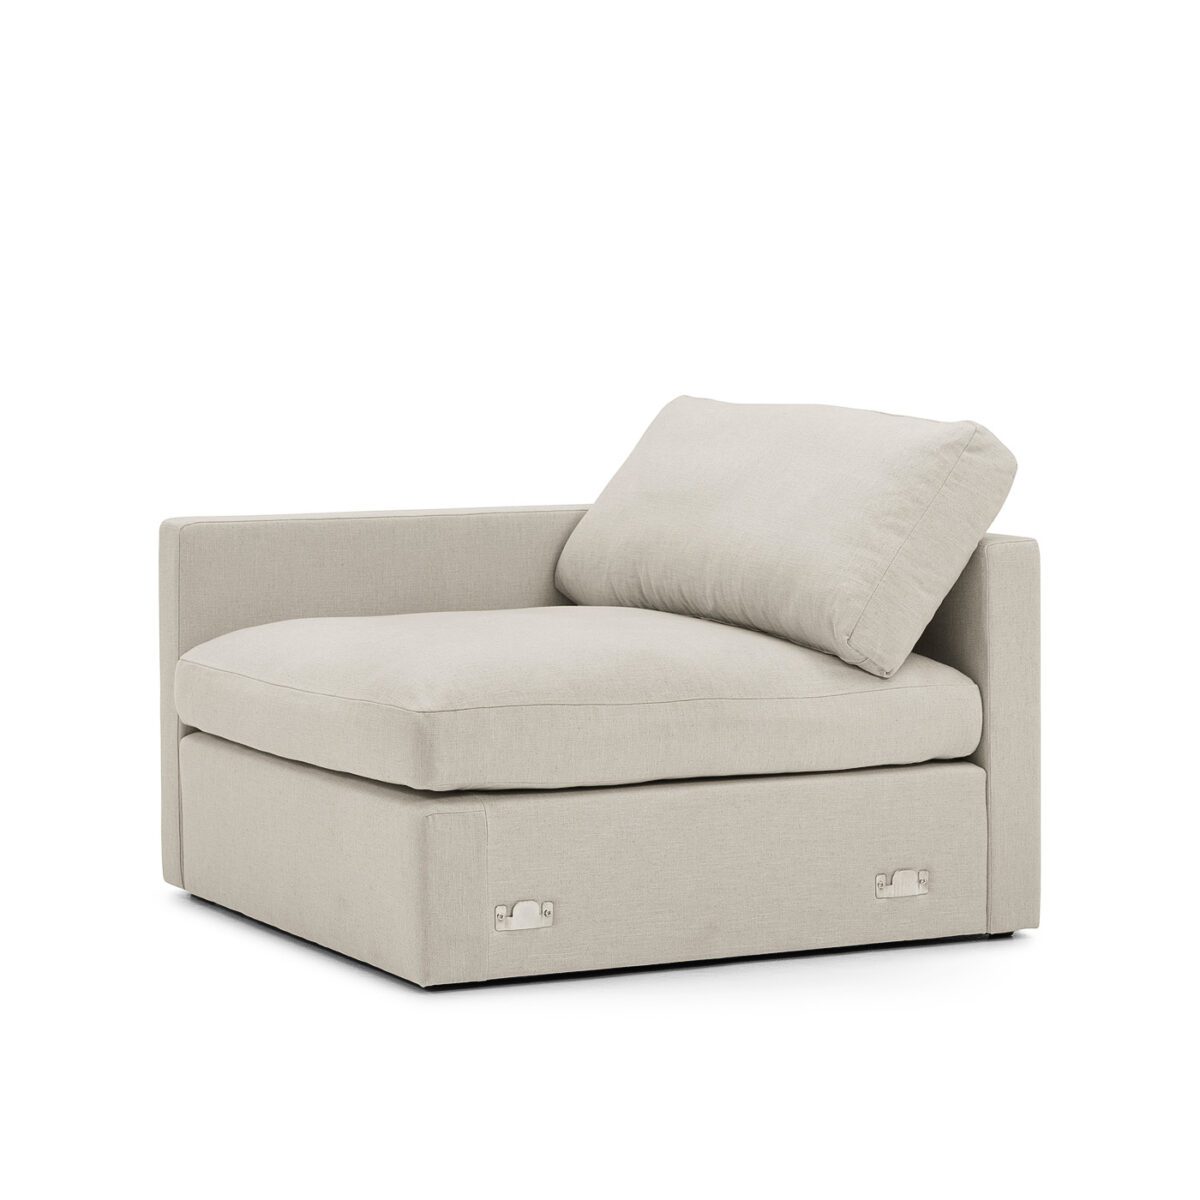 Lucie Grande 3-Seat Sofa (Without Armrests) Creme